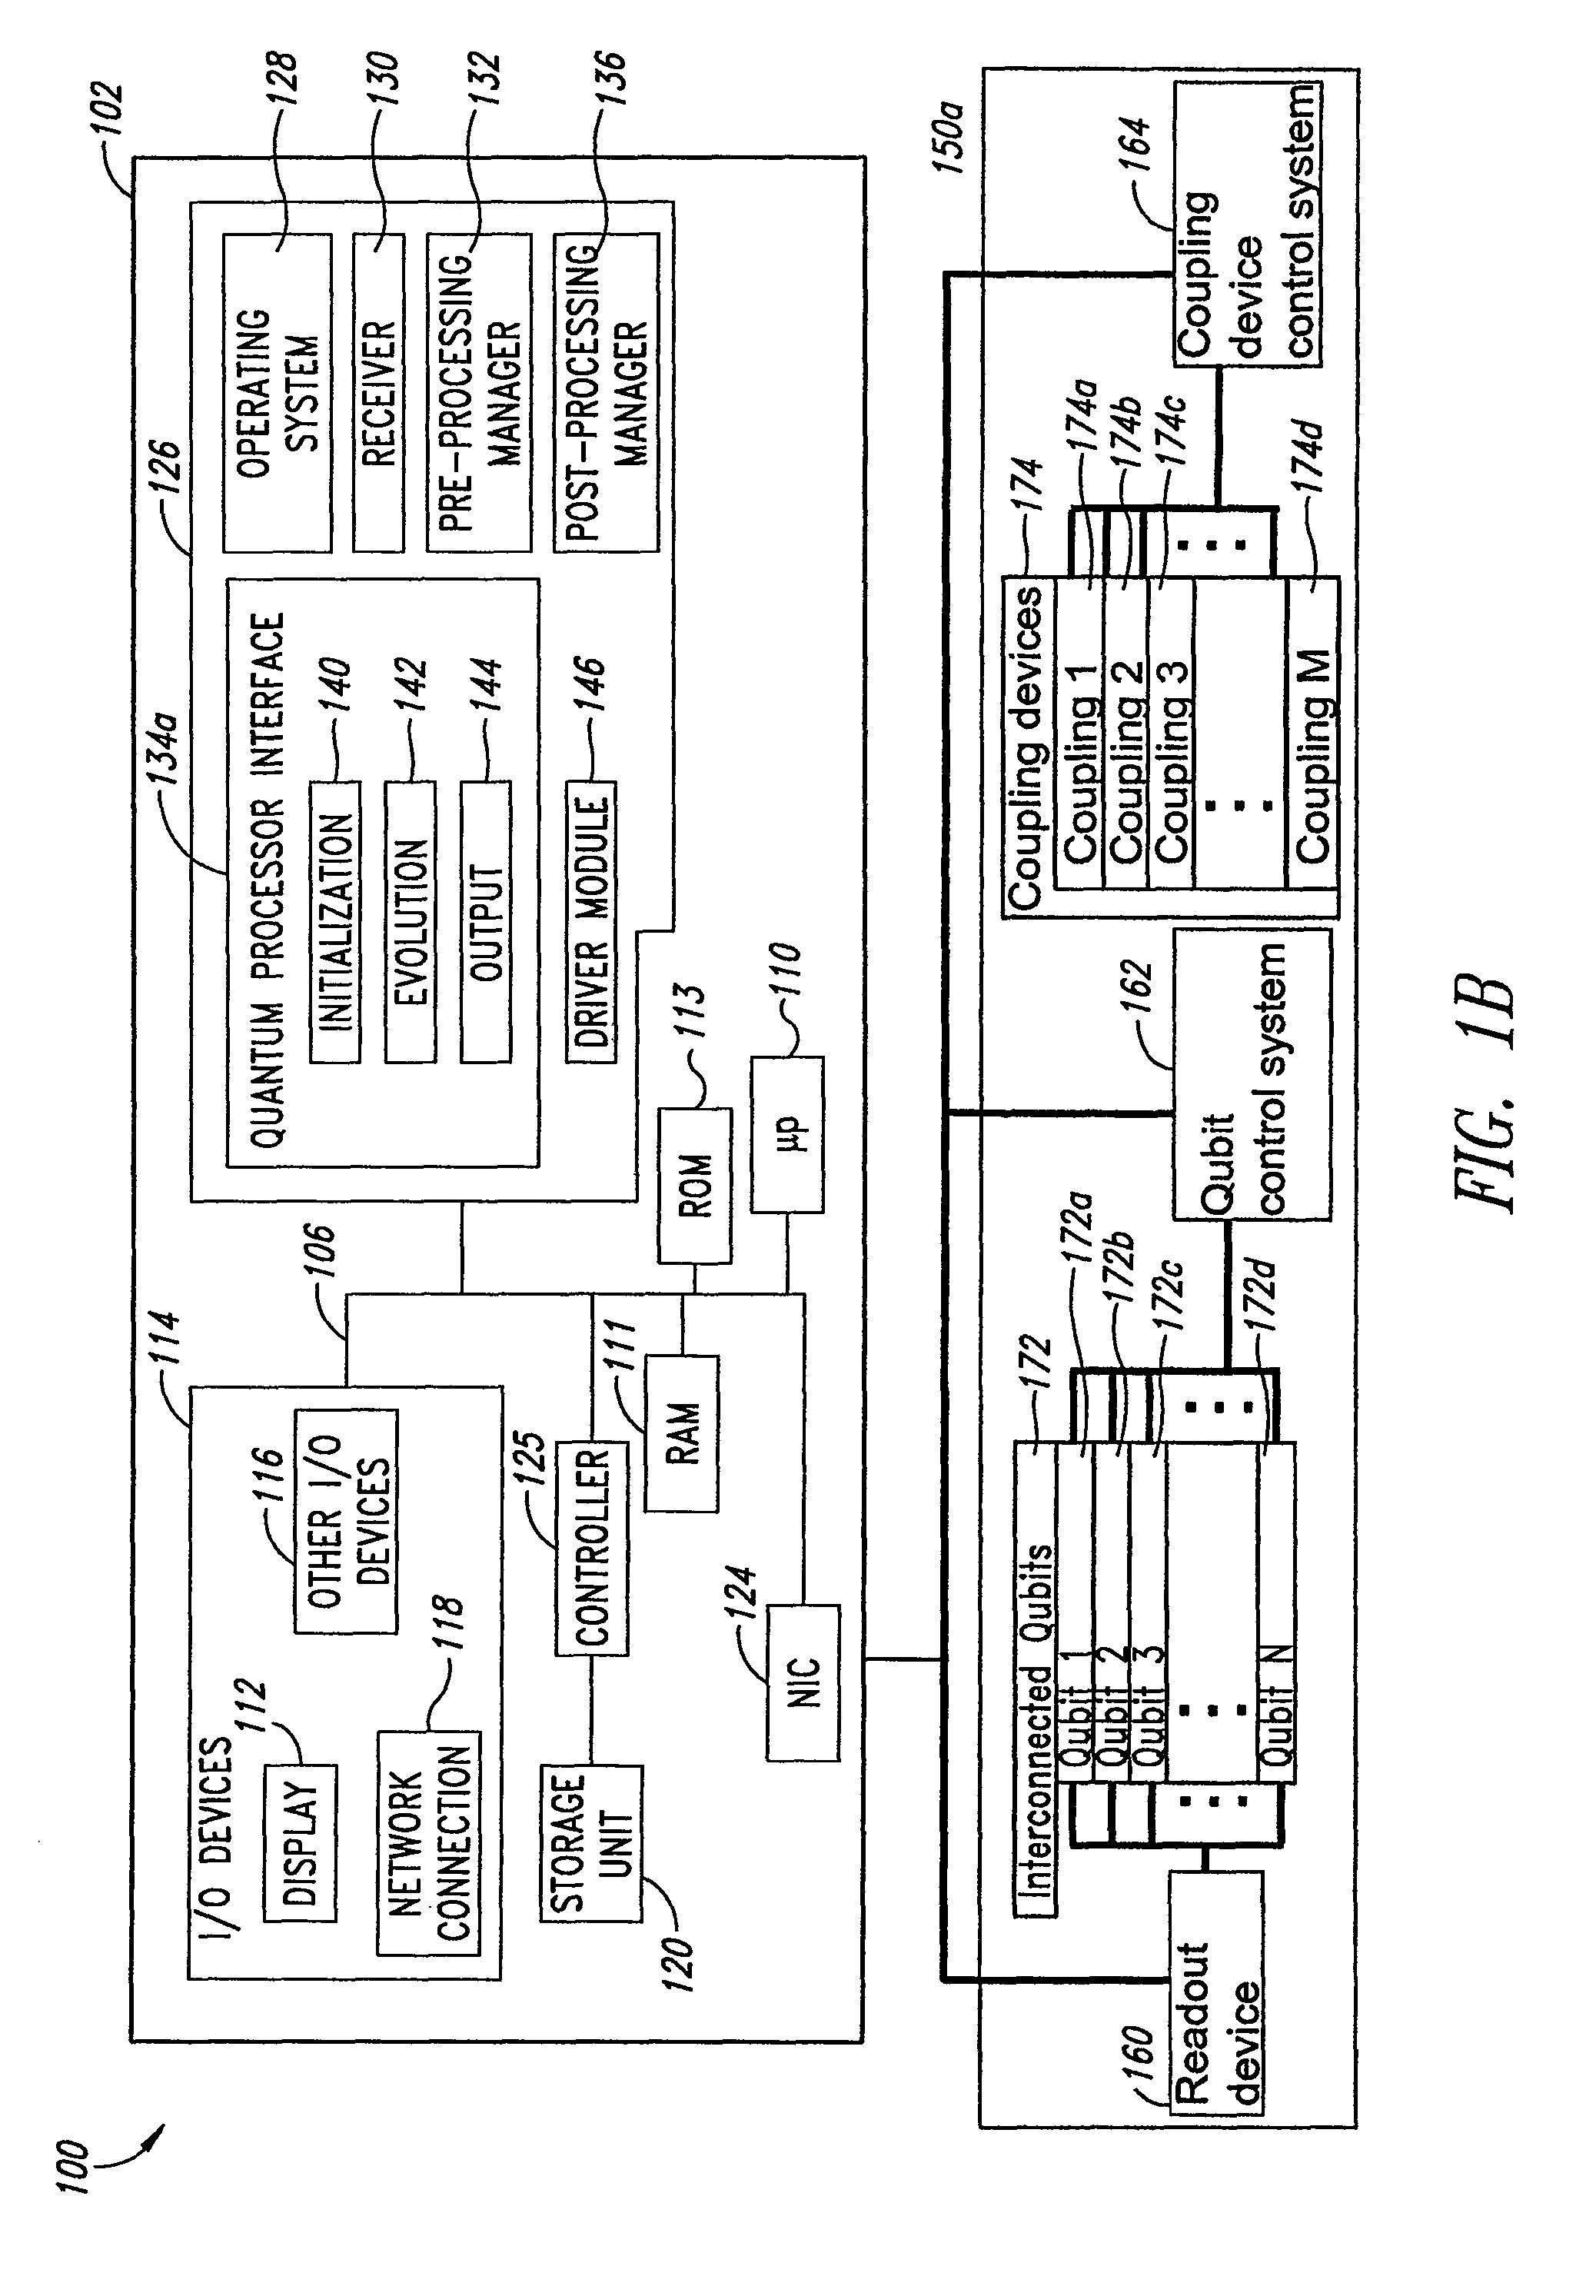 Systems, devices, and methods for interconnected processor topology